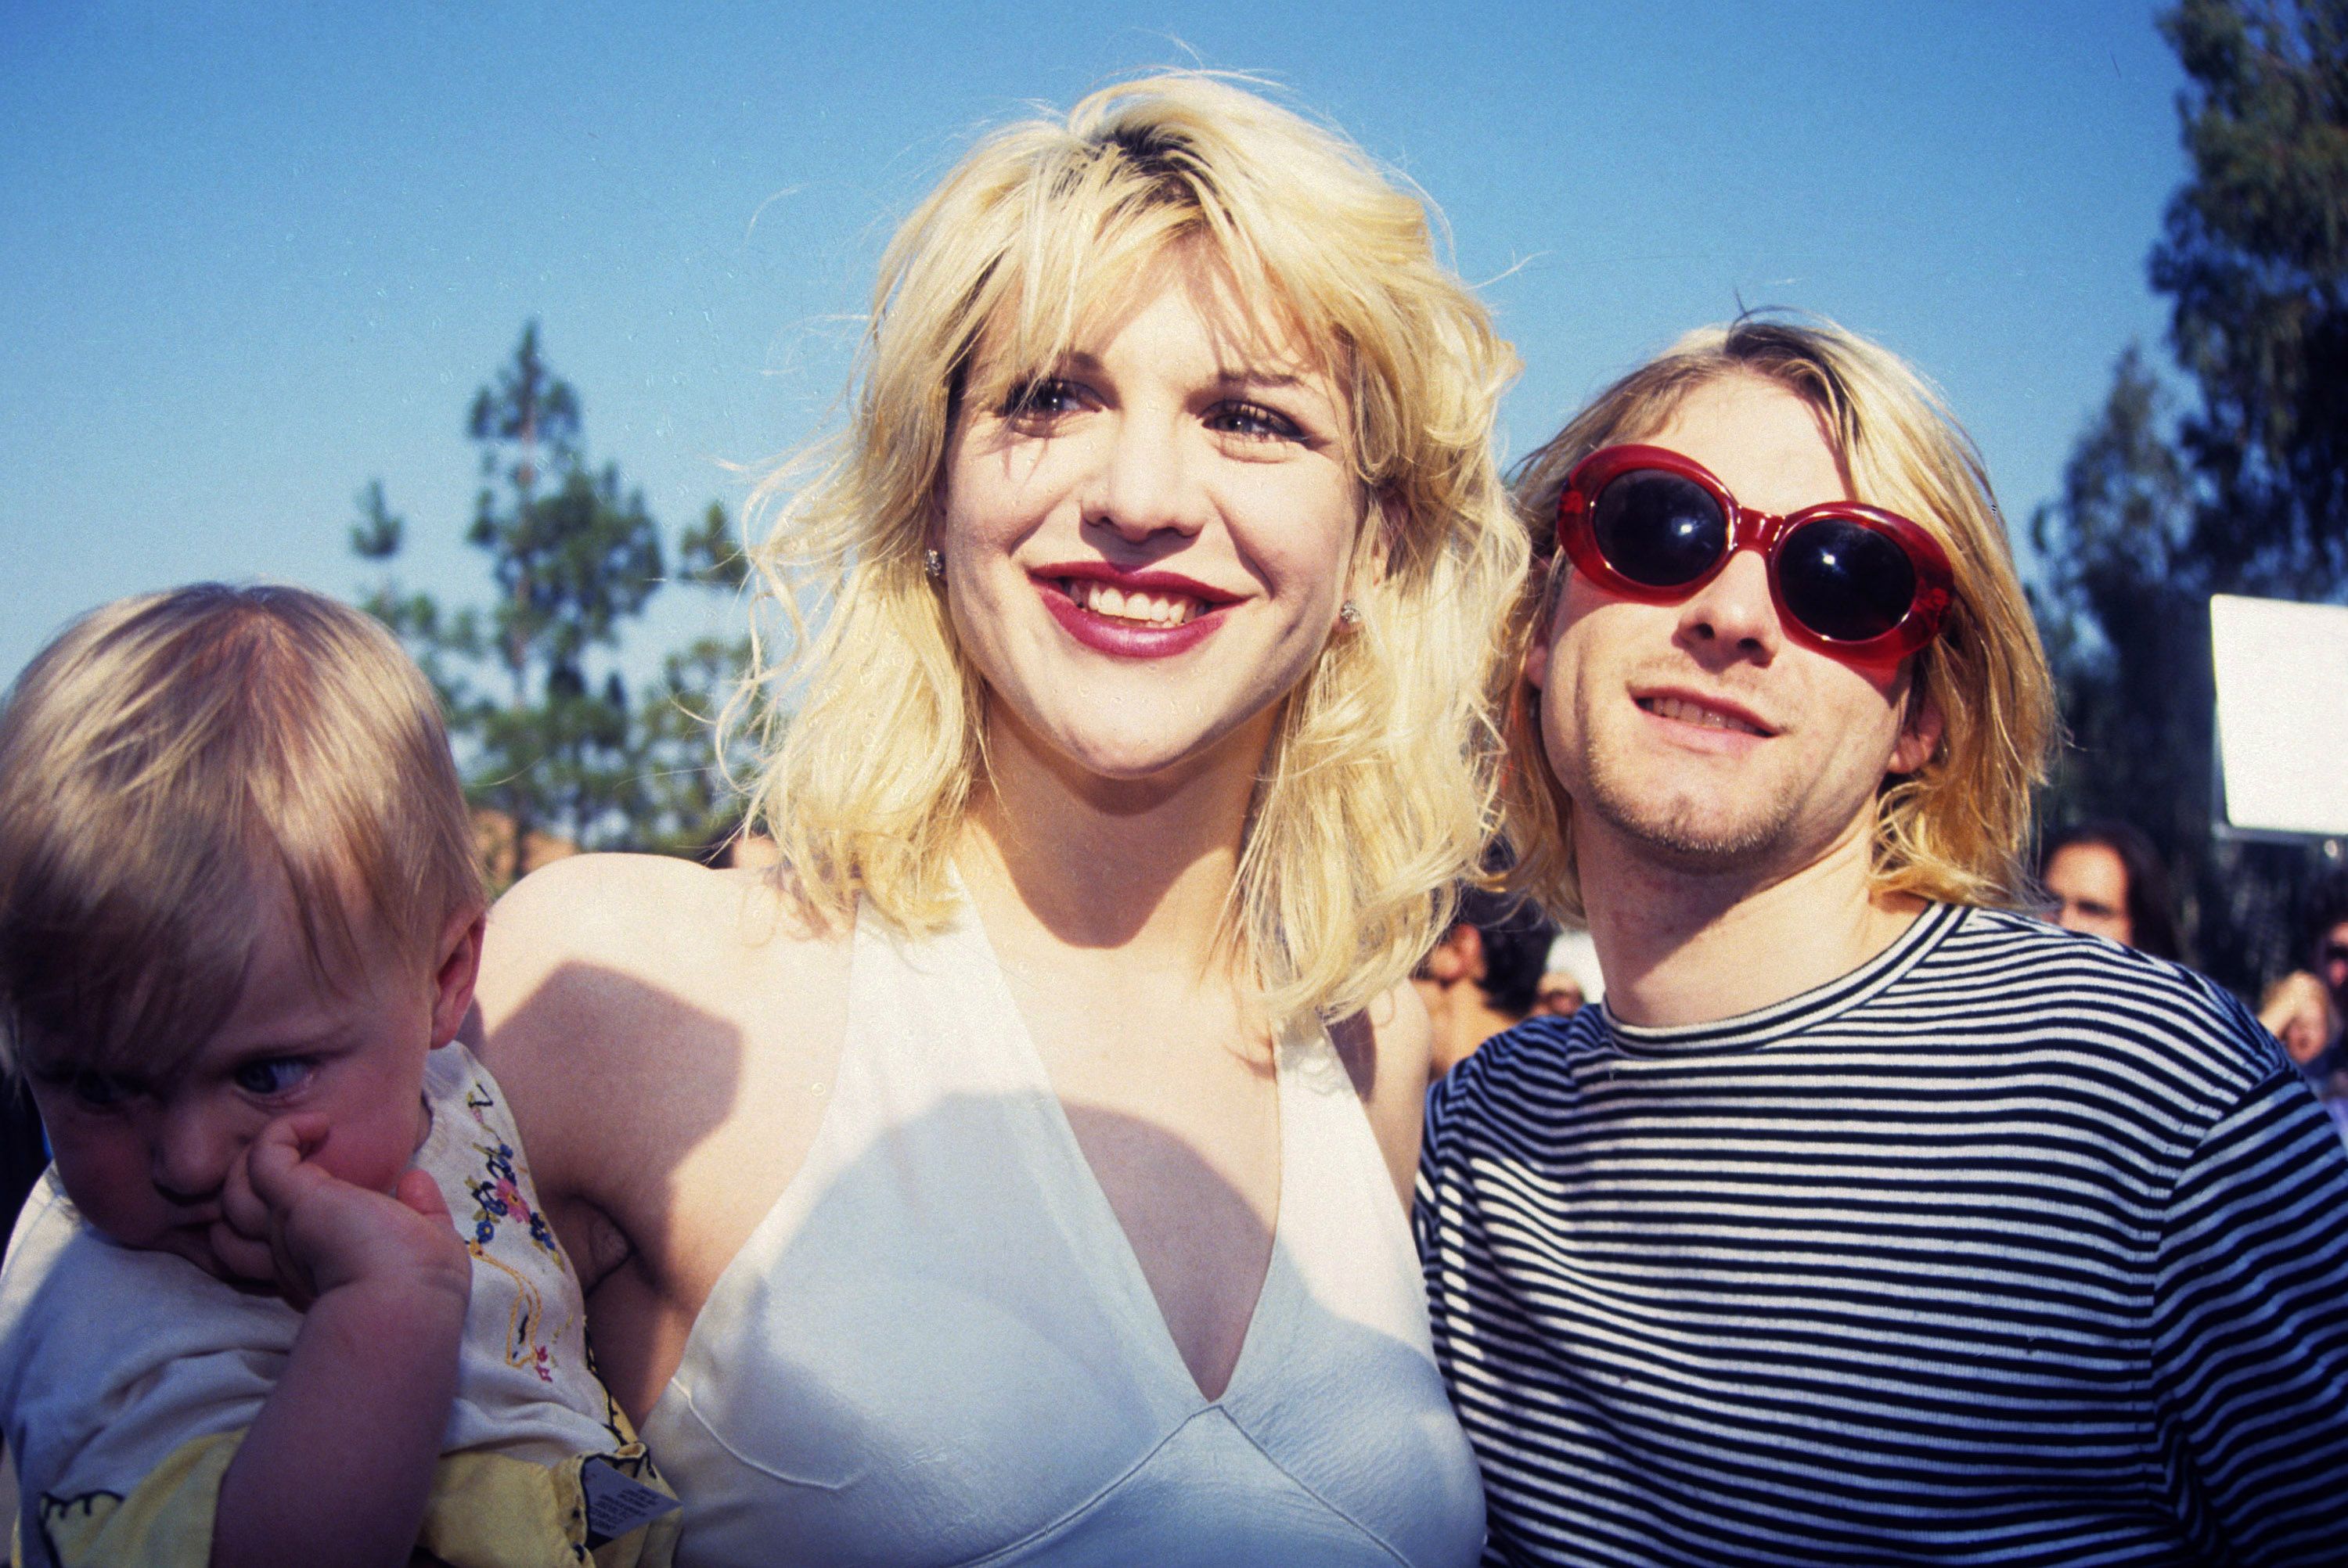 Kurt Cobain with wife Courtney Love and daughter Frances Bean Cobain at the 10th Annual MTV Video Music Awards. | Source: Getty Images